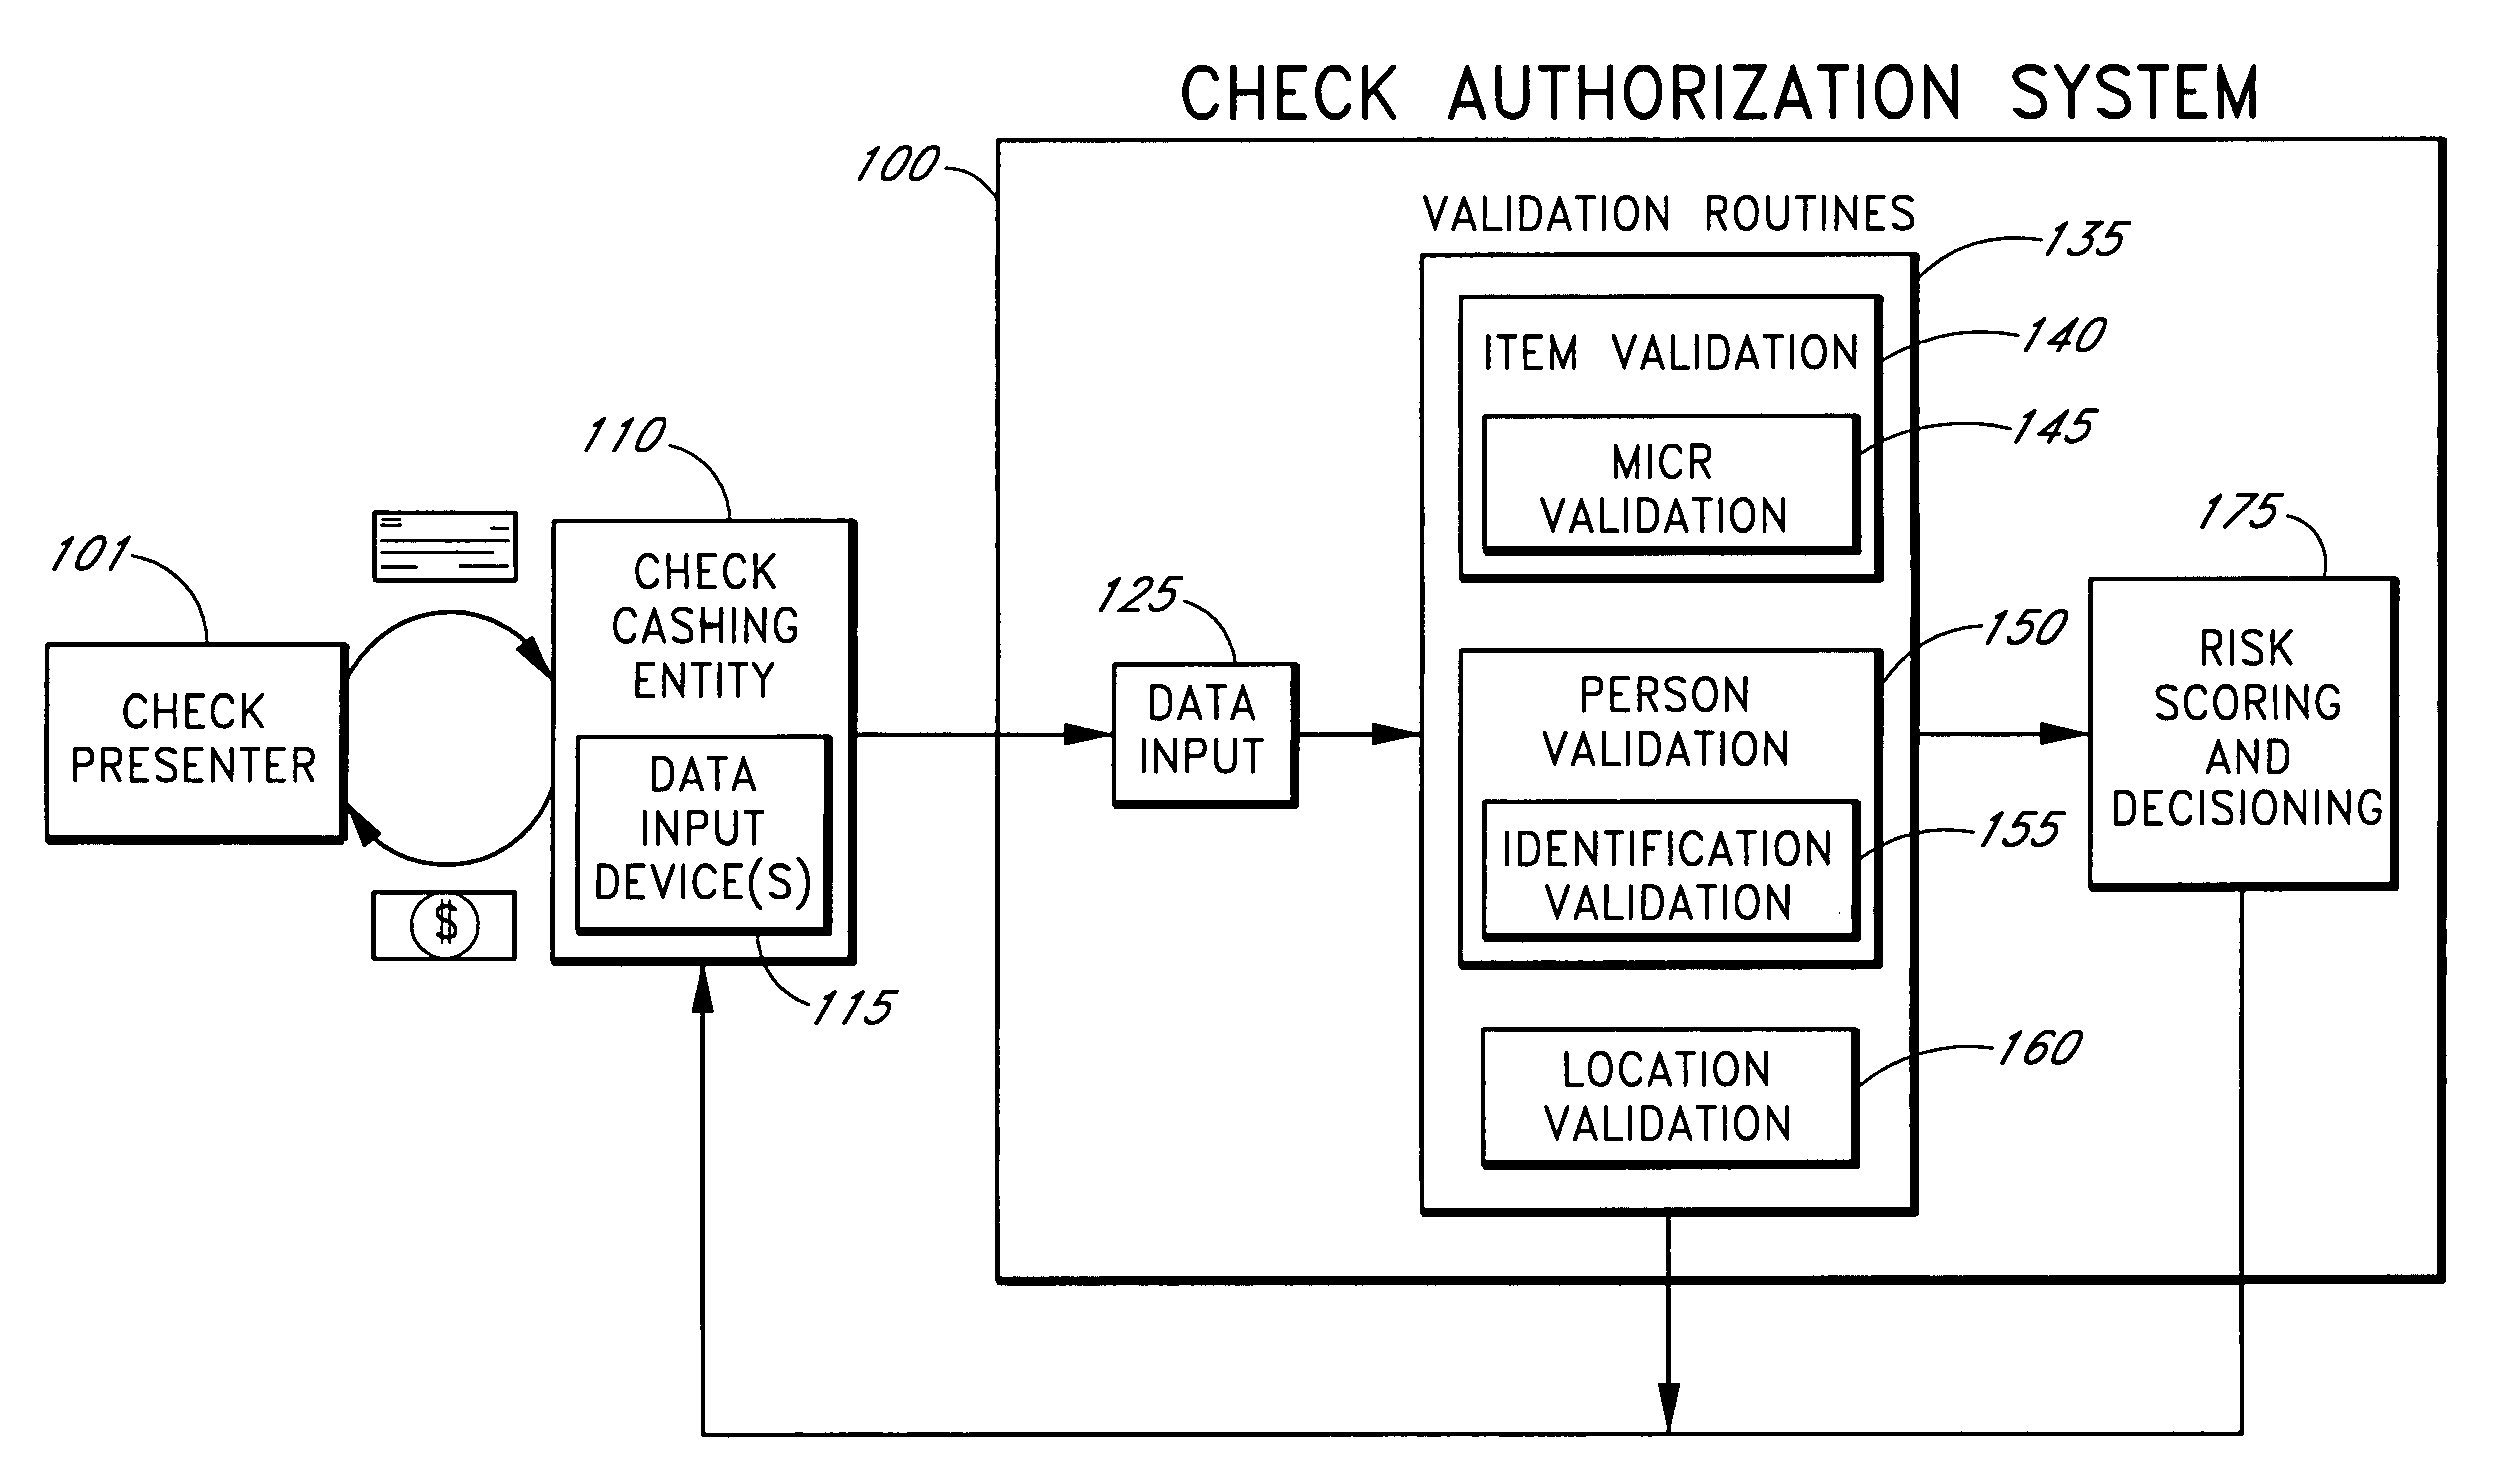 Systems and methods for assessing the risk of a financial transaction using biometric information